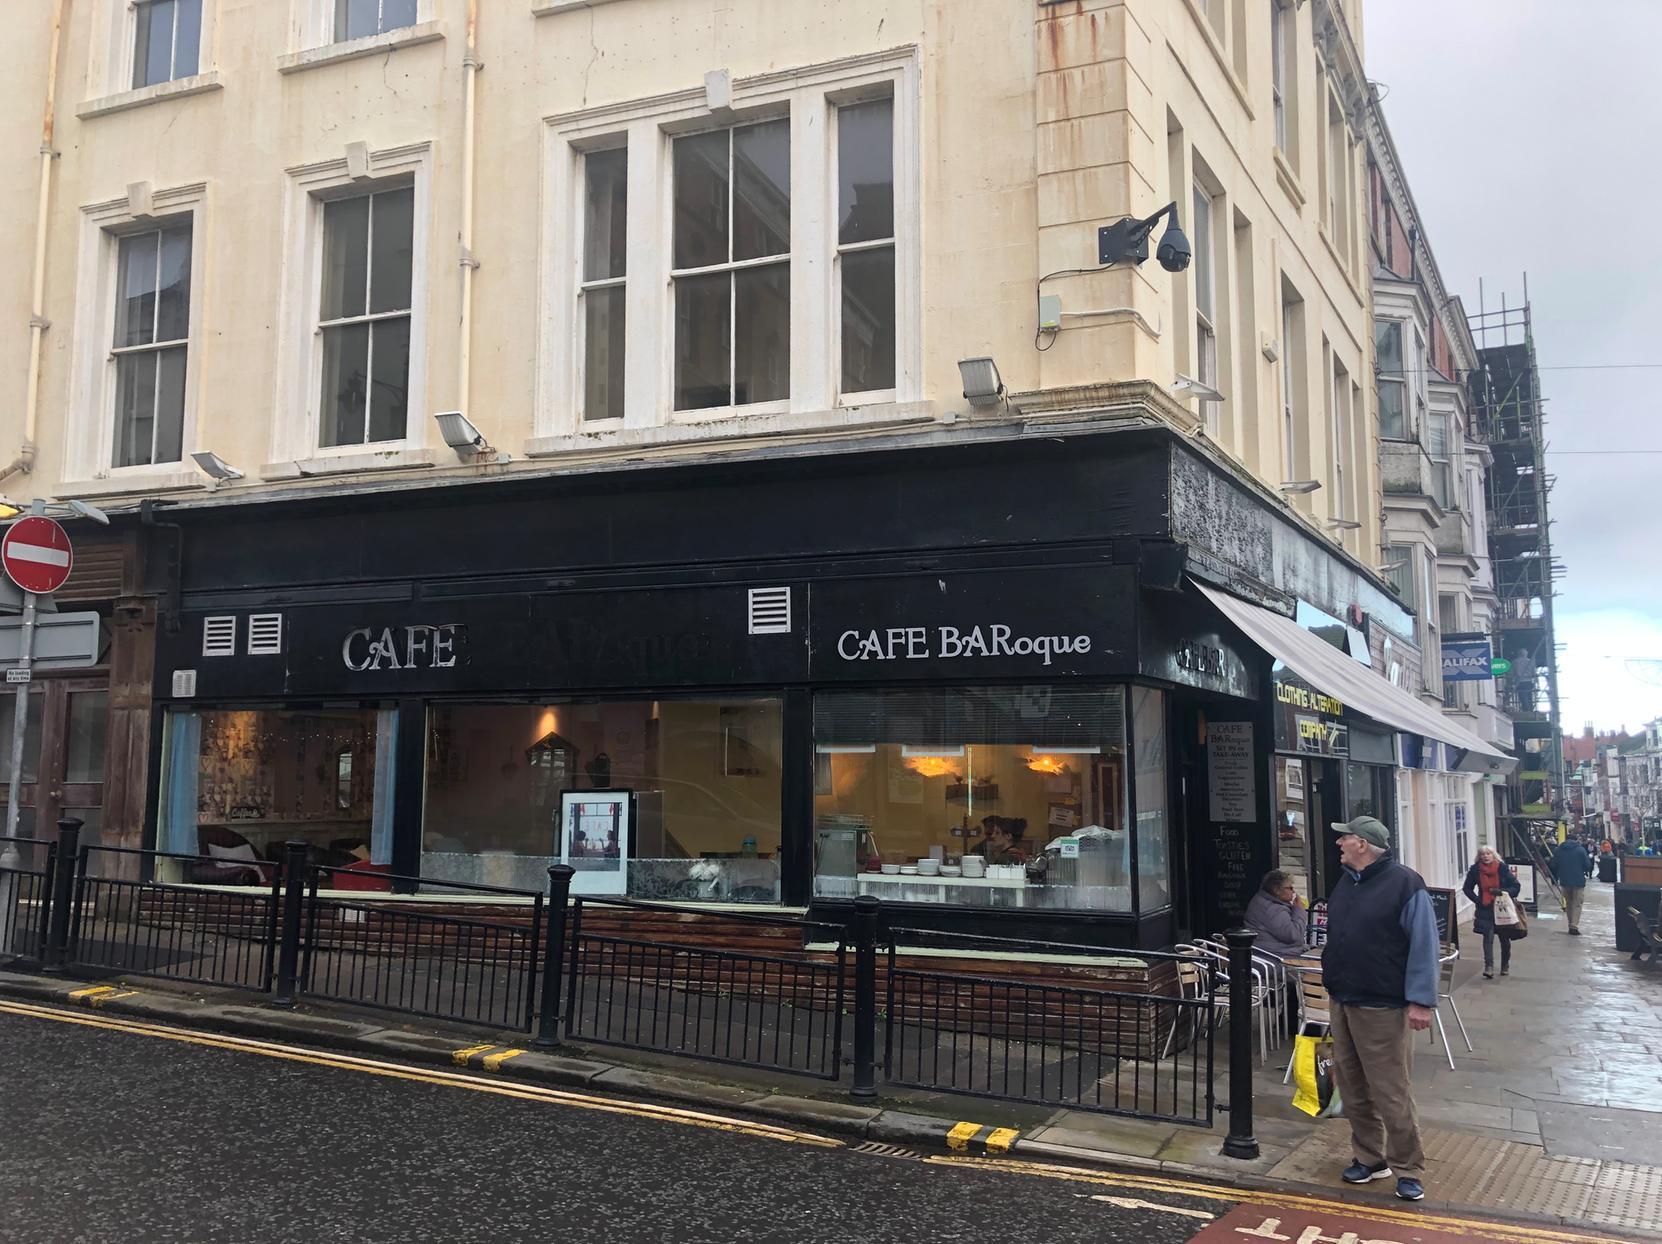 A reviewer said: This is a dear little cafe ,with comfy seating is a great place to stop in the middle of the shopping area. The delicious coffee comes complete with a chocolate. Great value.